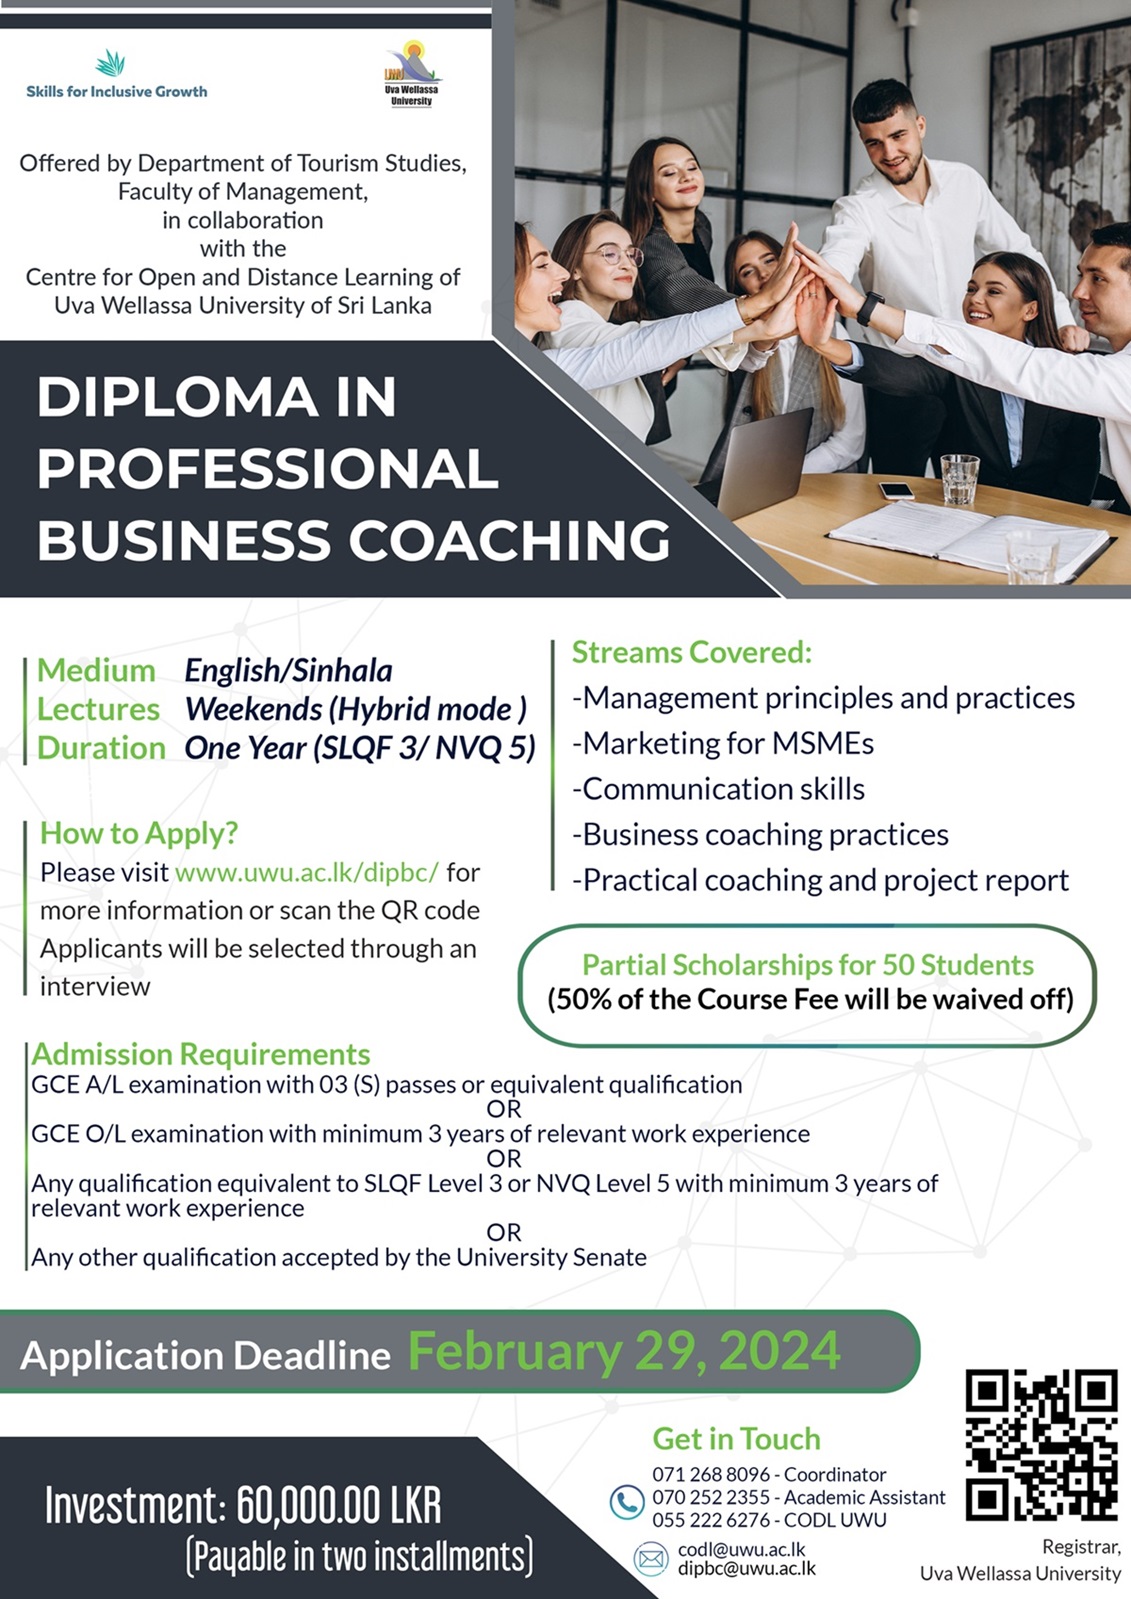 Dip Professional Business Coaching extended